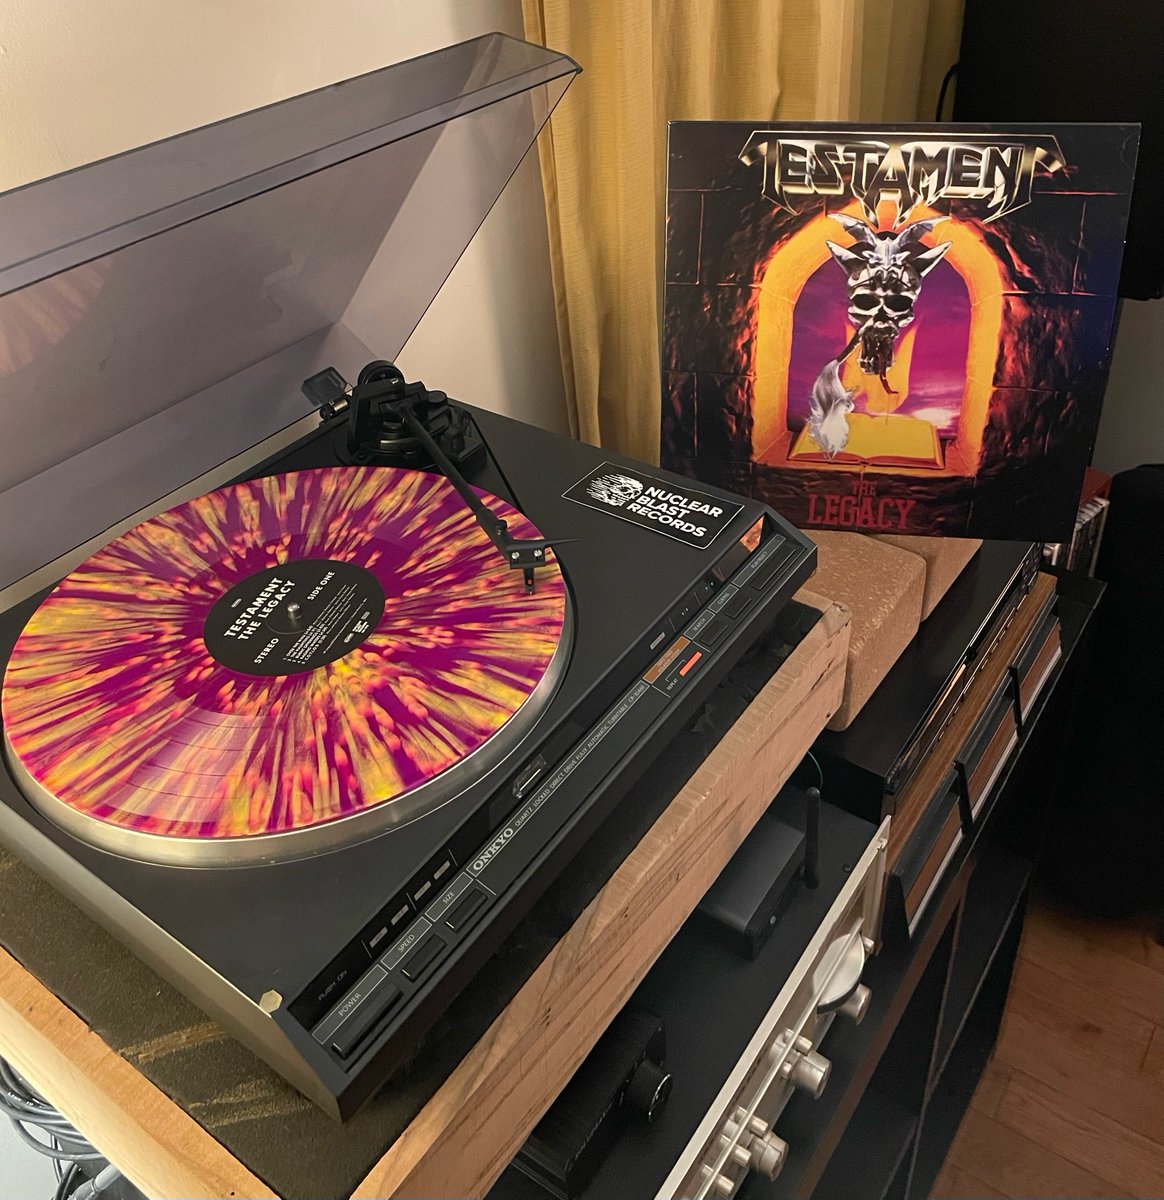 .@nuclearblast Records has officially sold out of 'The New Order' vinyl reissues, but they've still got a bunch of 'The Legacy' on Purple w/ Yellow Splatter vinyl! Grab yours before they're gone for good 🔥 🔗 ⤵️ shop.nuclearblast.com/collections/te…